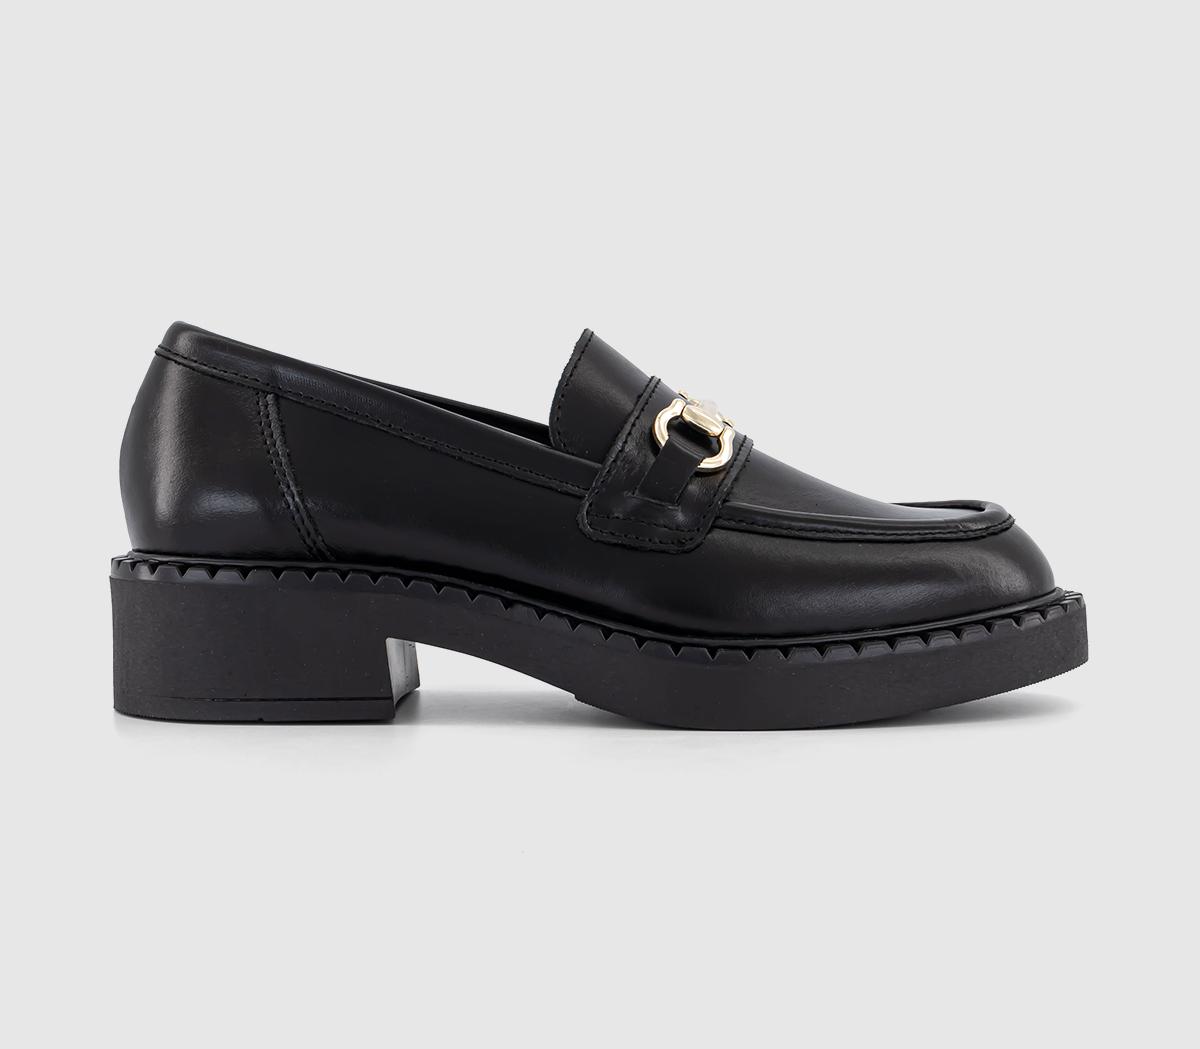 Future Chunky Hardware Loafers Black Leather